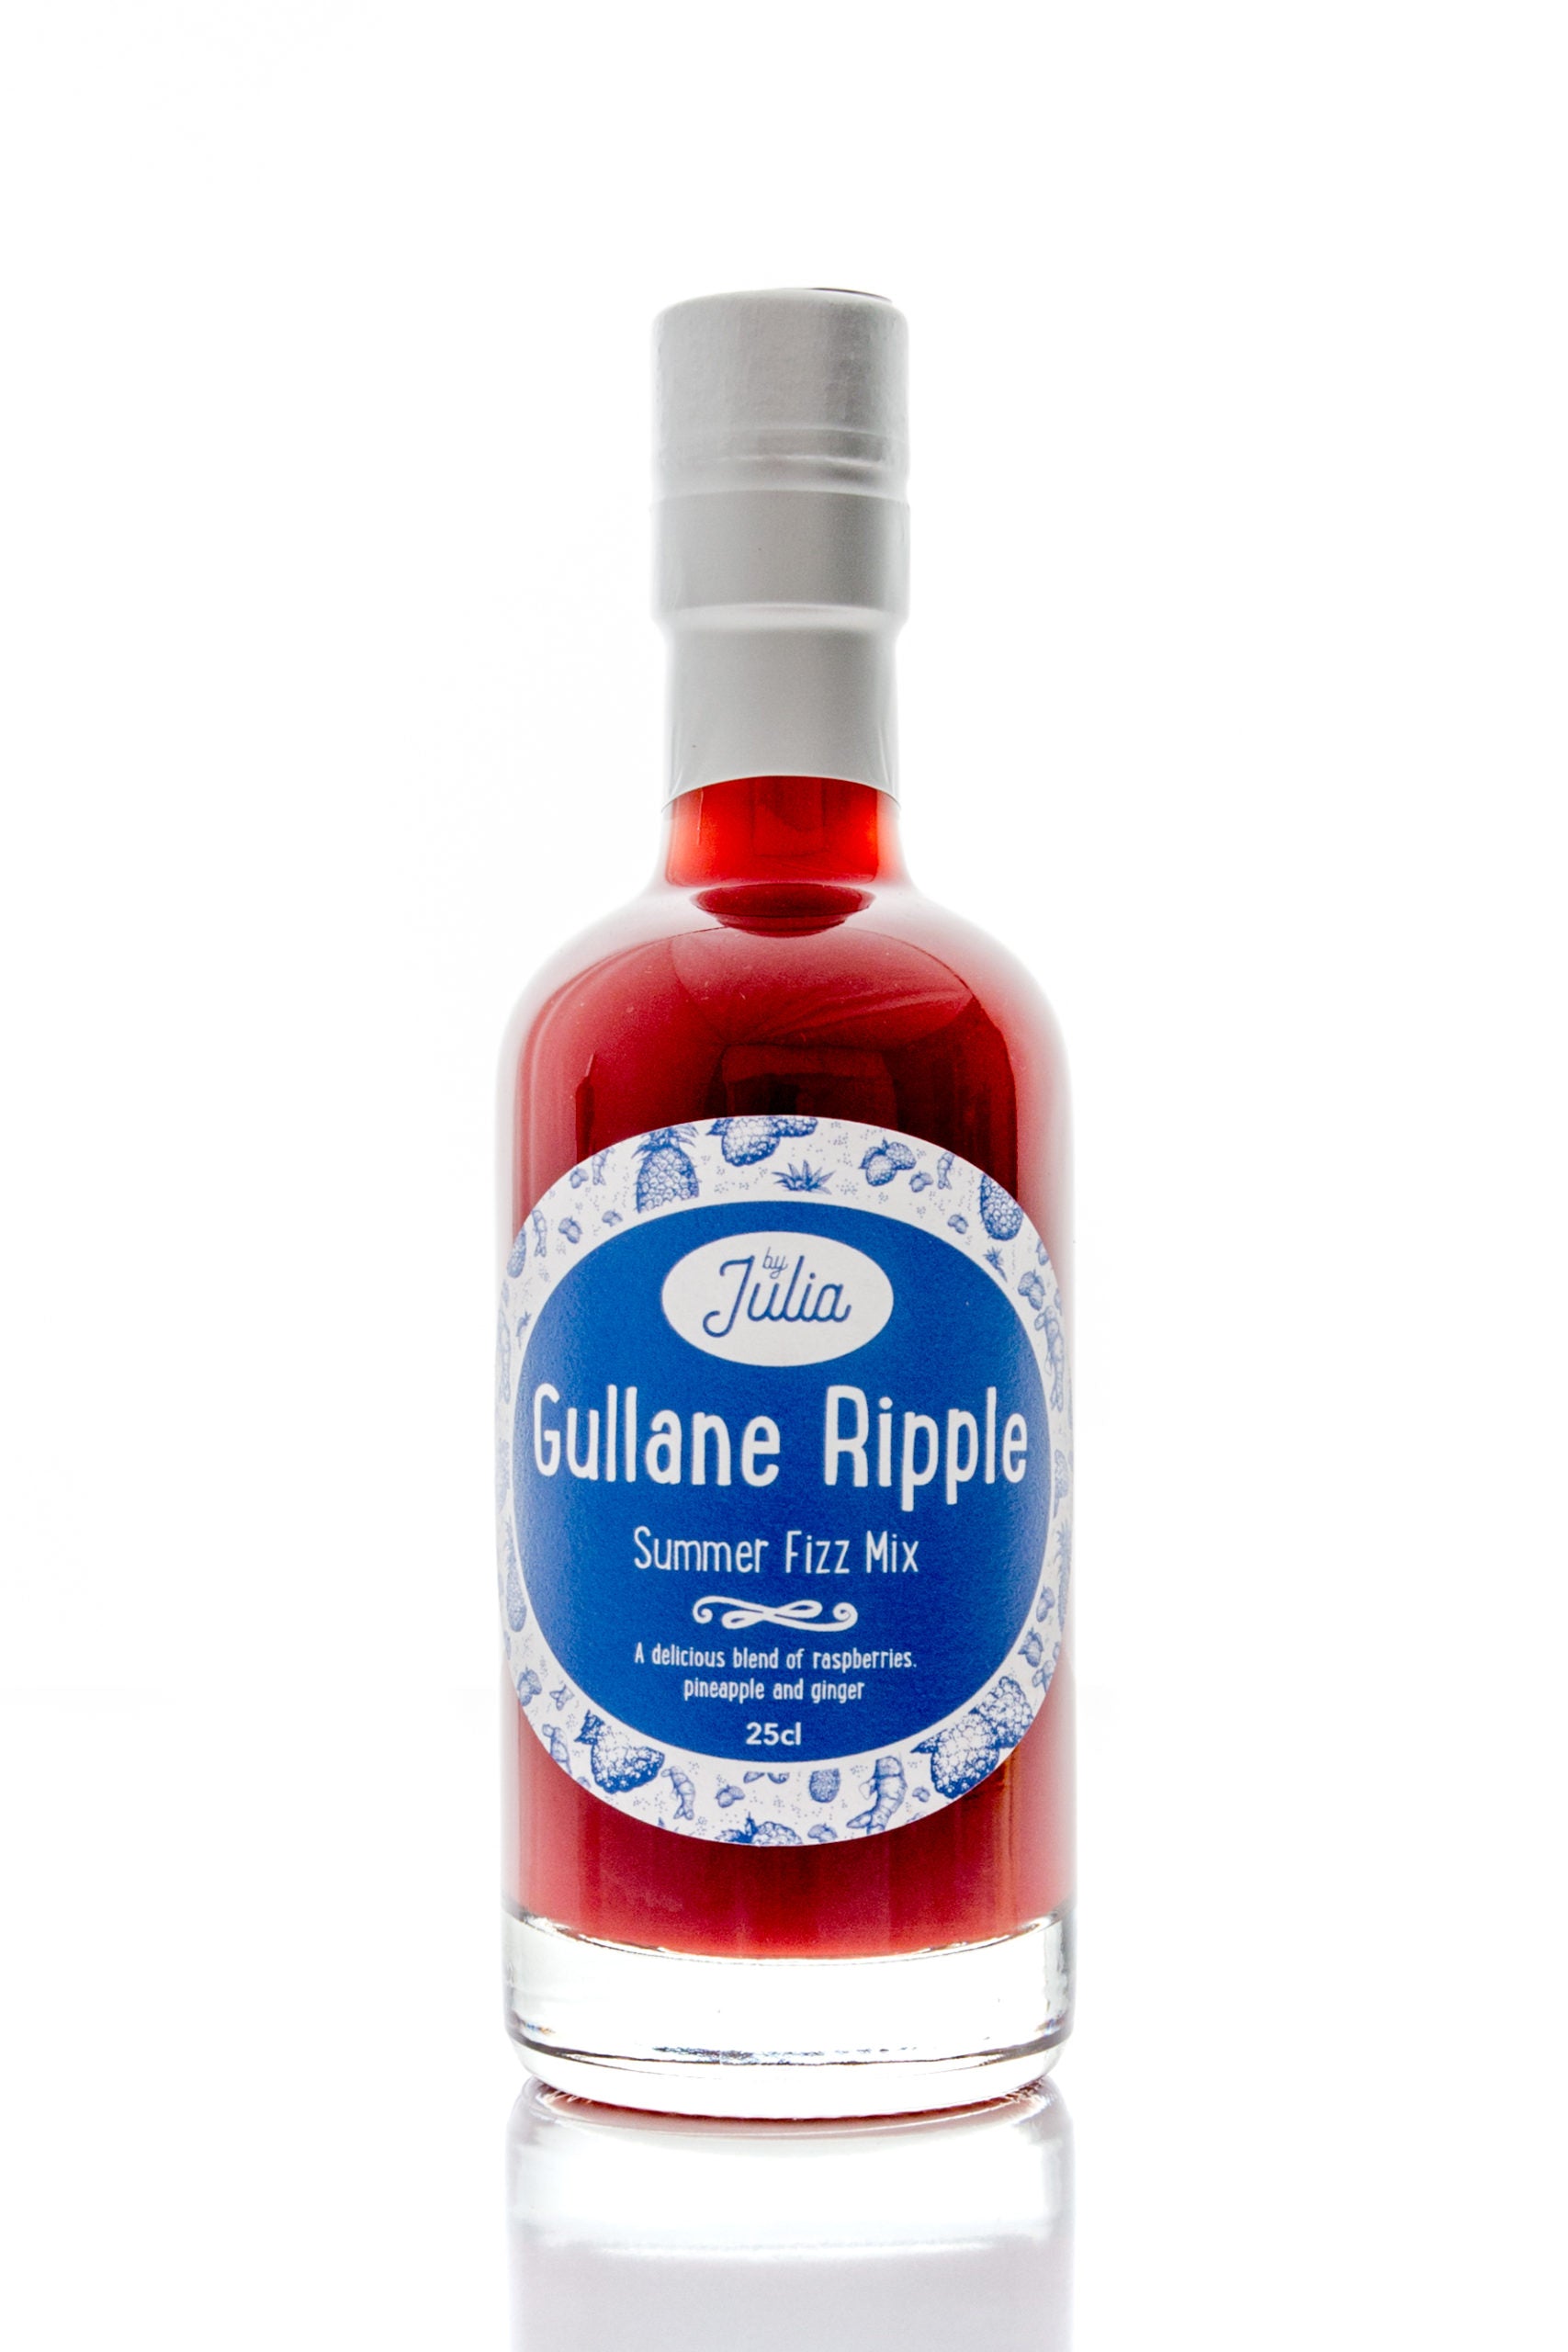 Large and Small Bottle of Gullane Ripple Summer Fizz Mix on white background